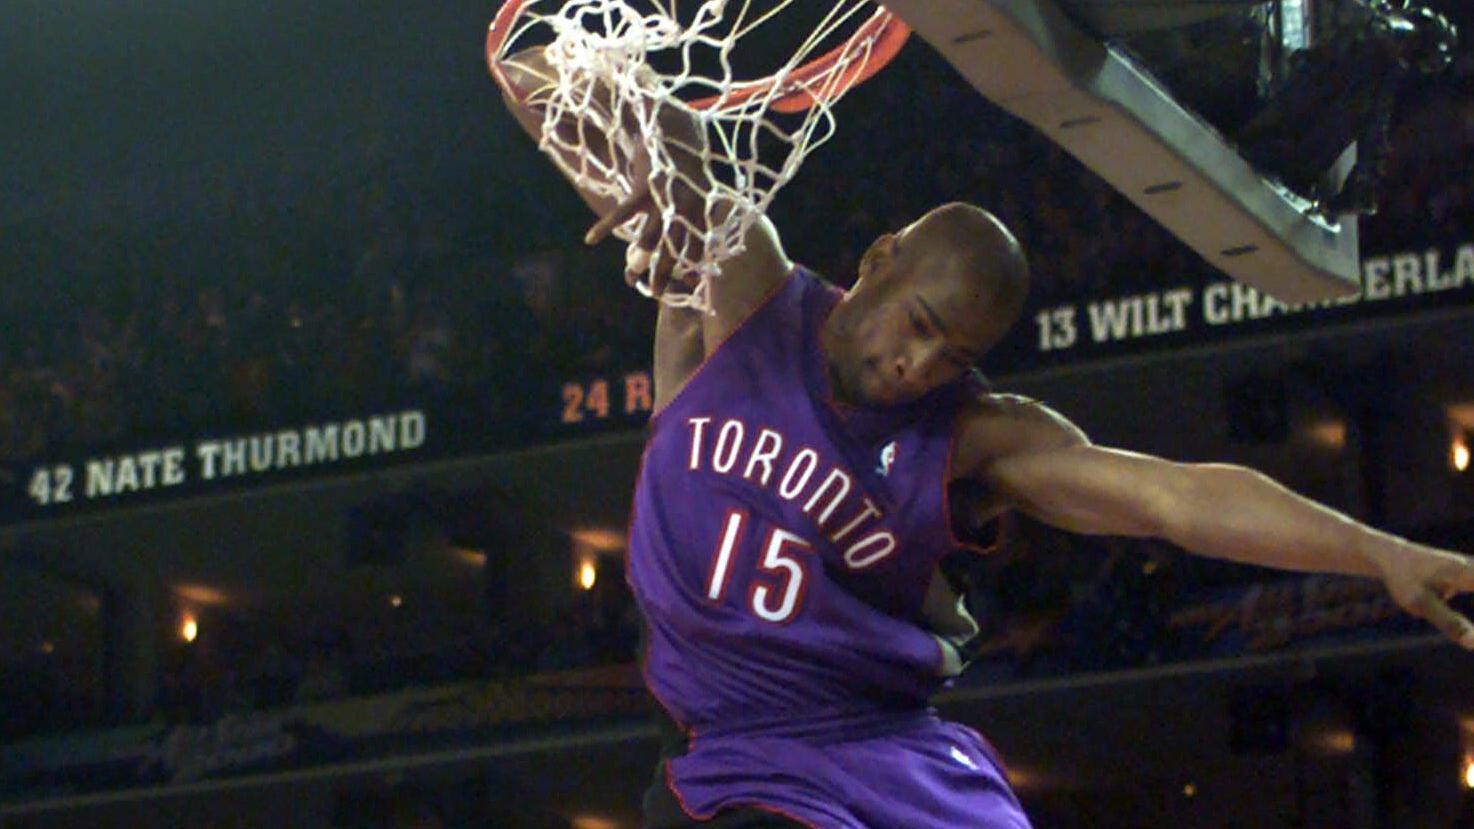 Vince Carter of the Toronto Raptors goes for a dunk during the 2000